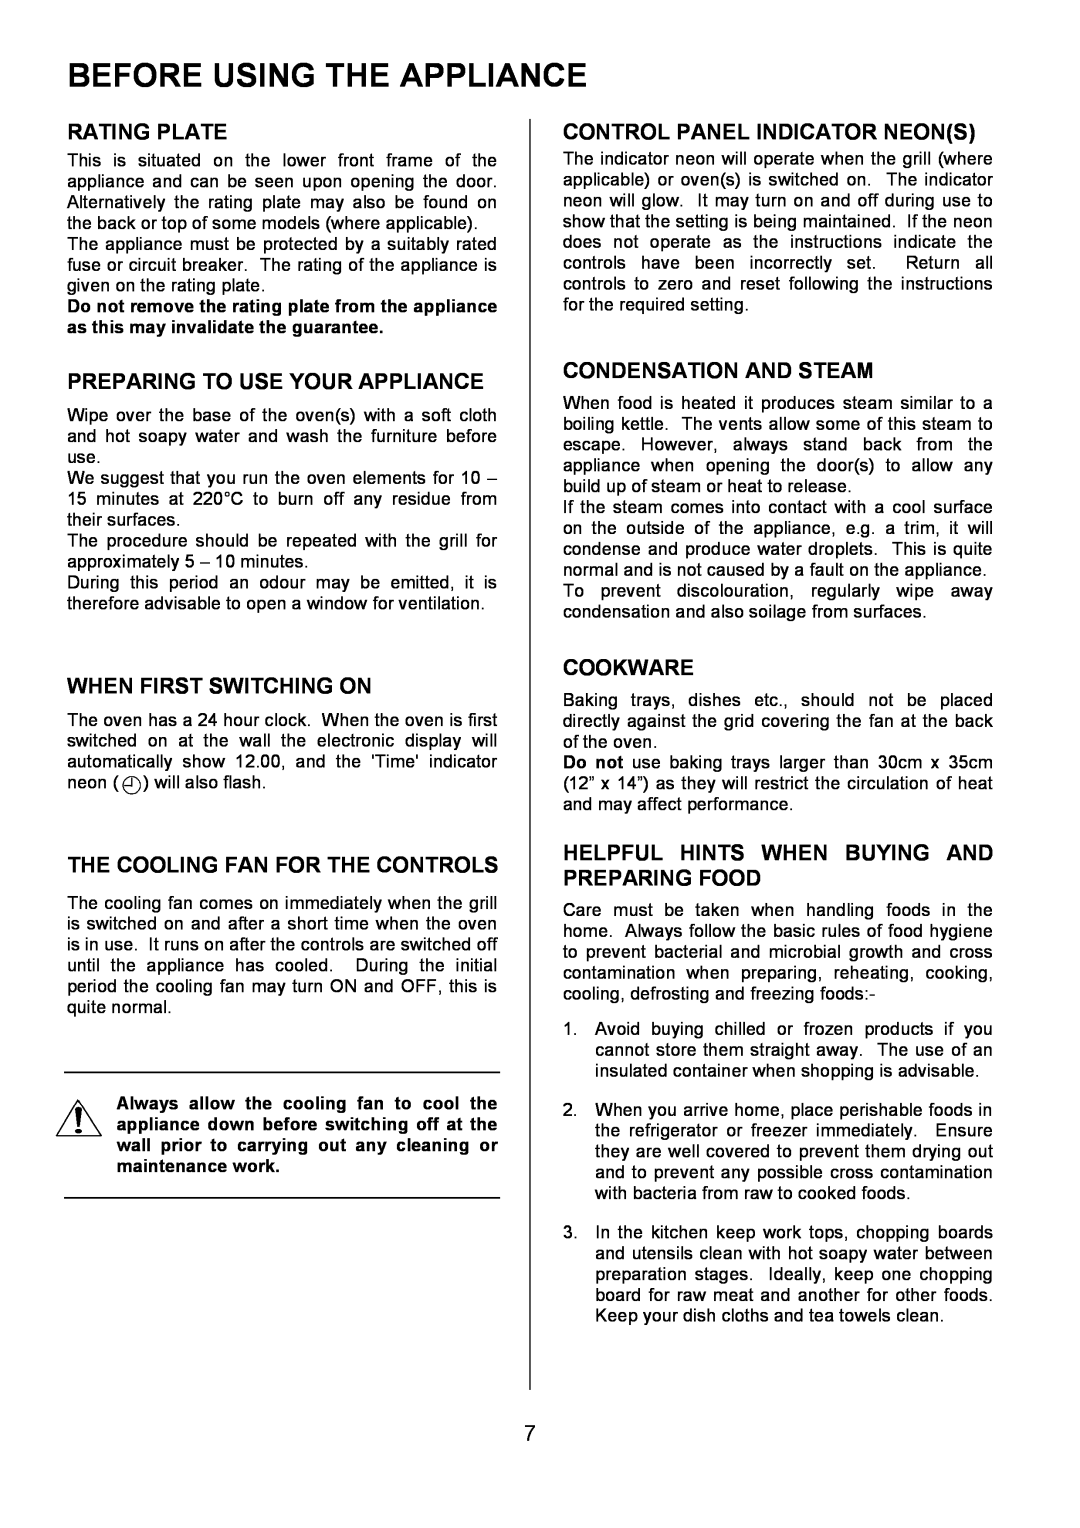 Zanussi ZOU 330 manual Before Using The Appliance, Rating Plate, Preparing To Use Your Appliance, When First Switching On 